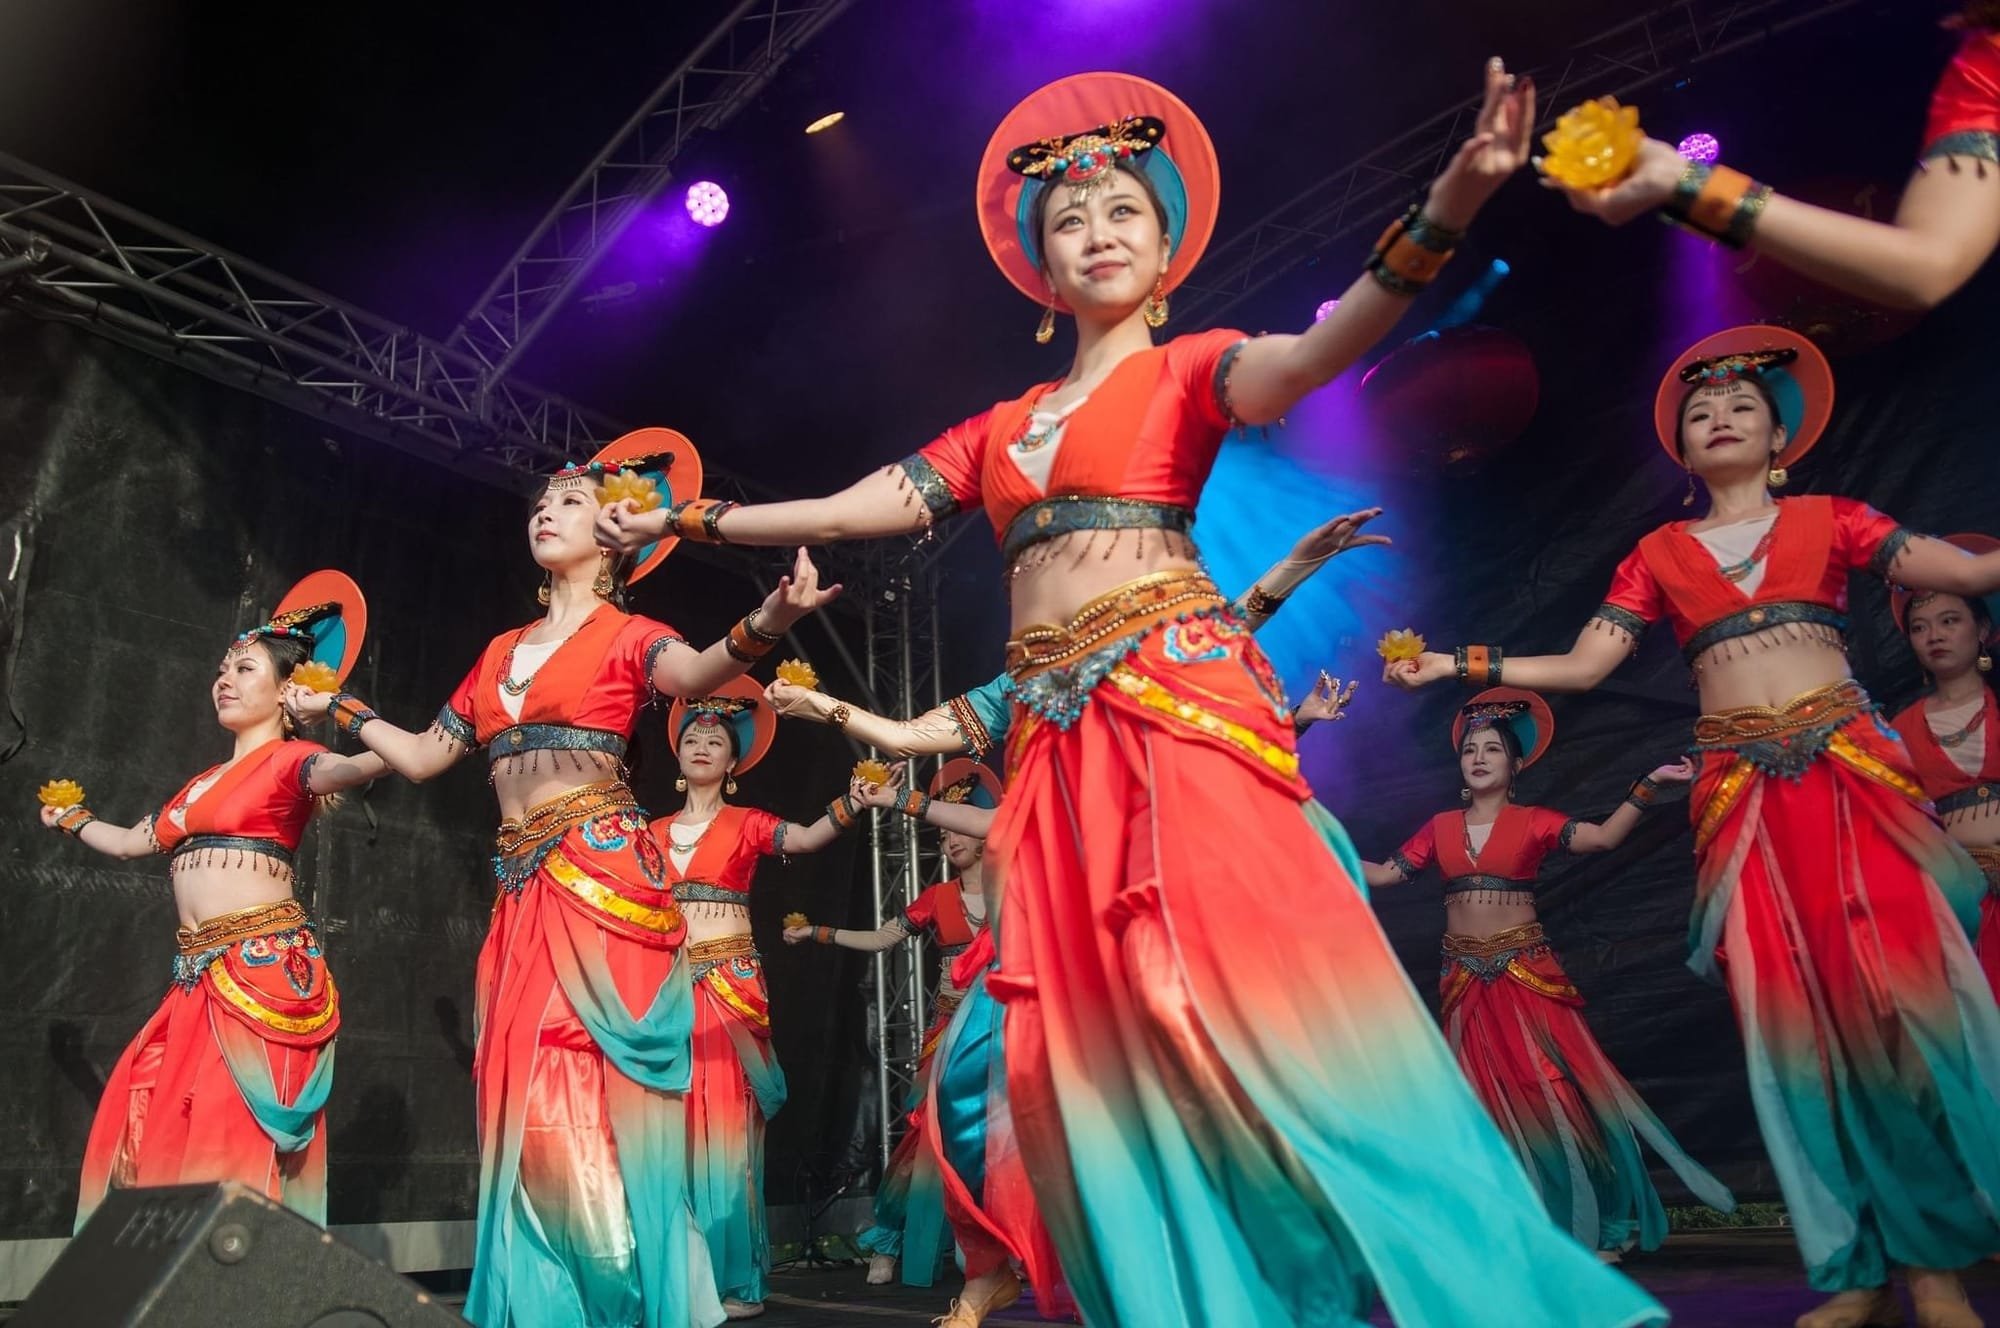 The Lunar Chinese New Year Festival comes to Sheffield